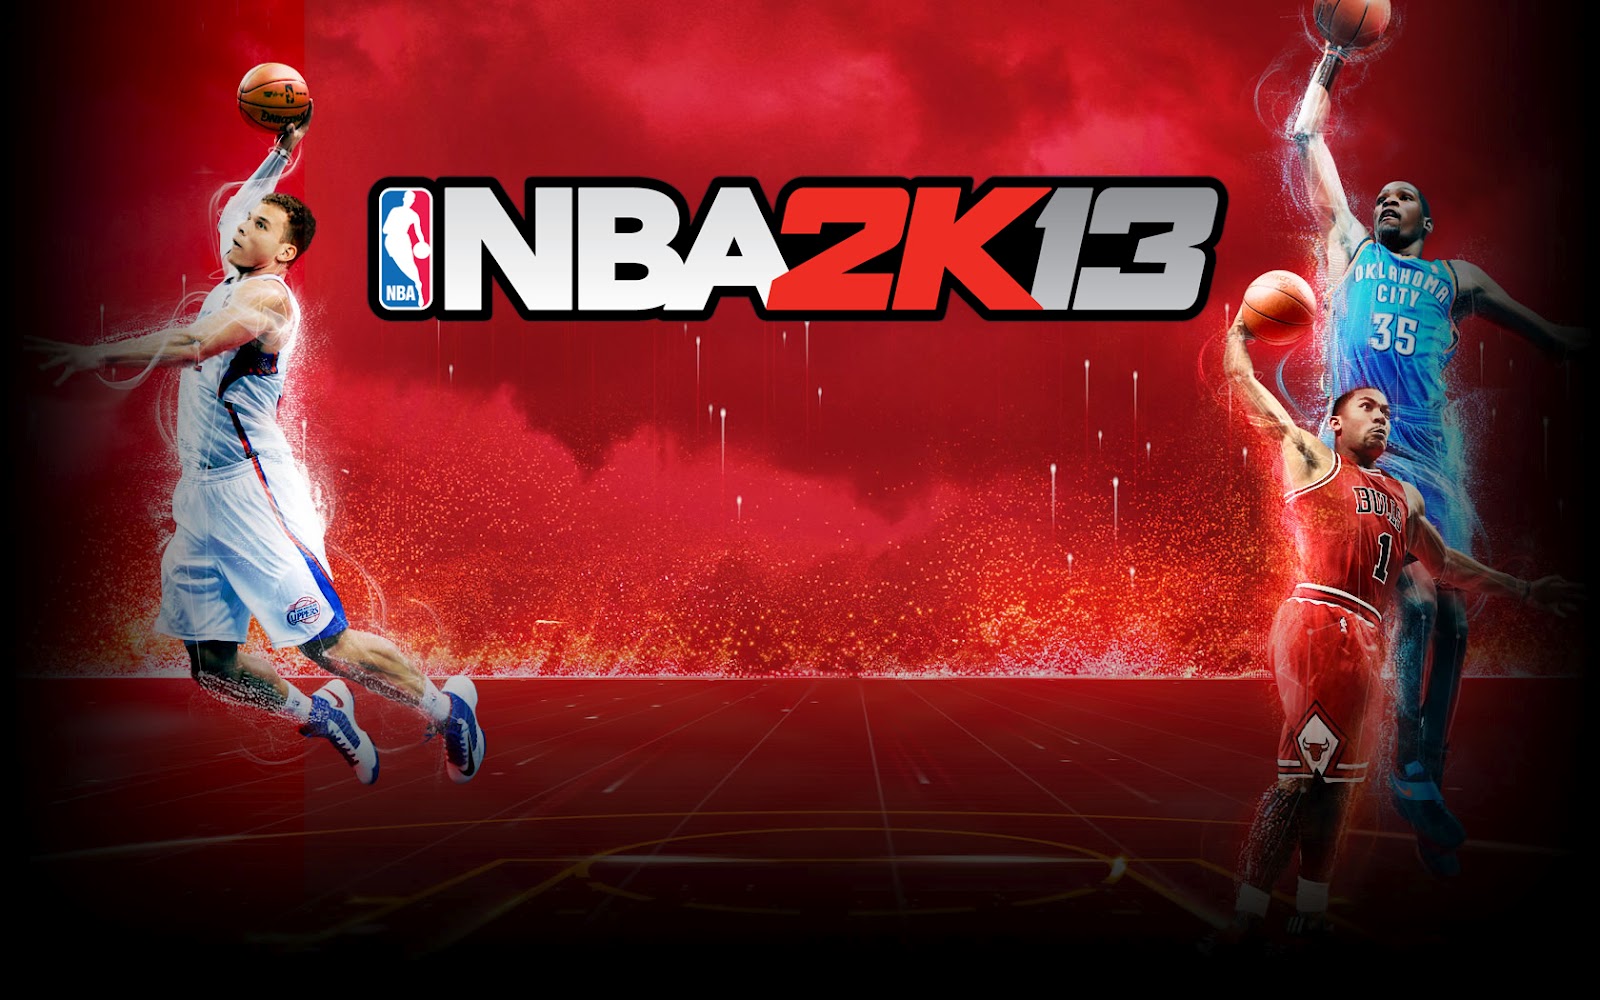 Nba 2k15 for ppsspp android download